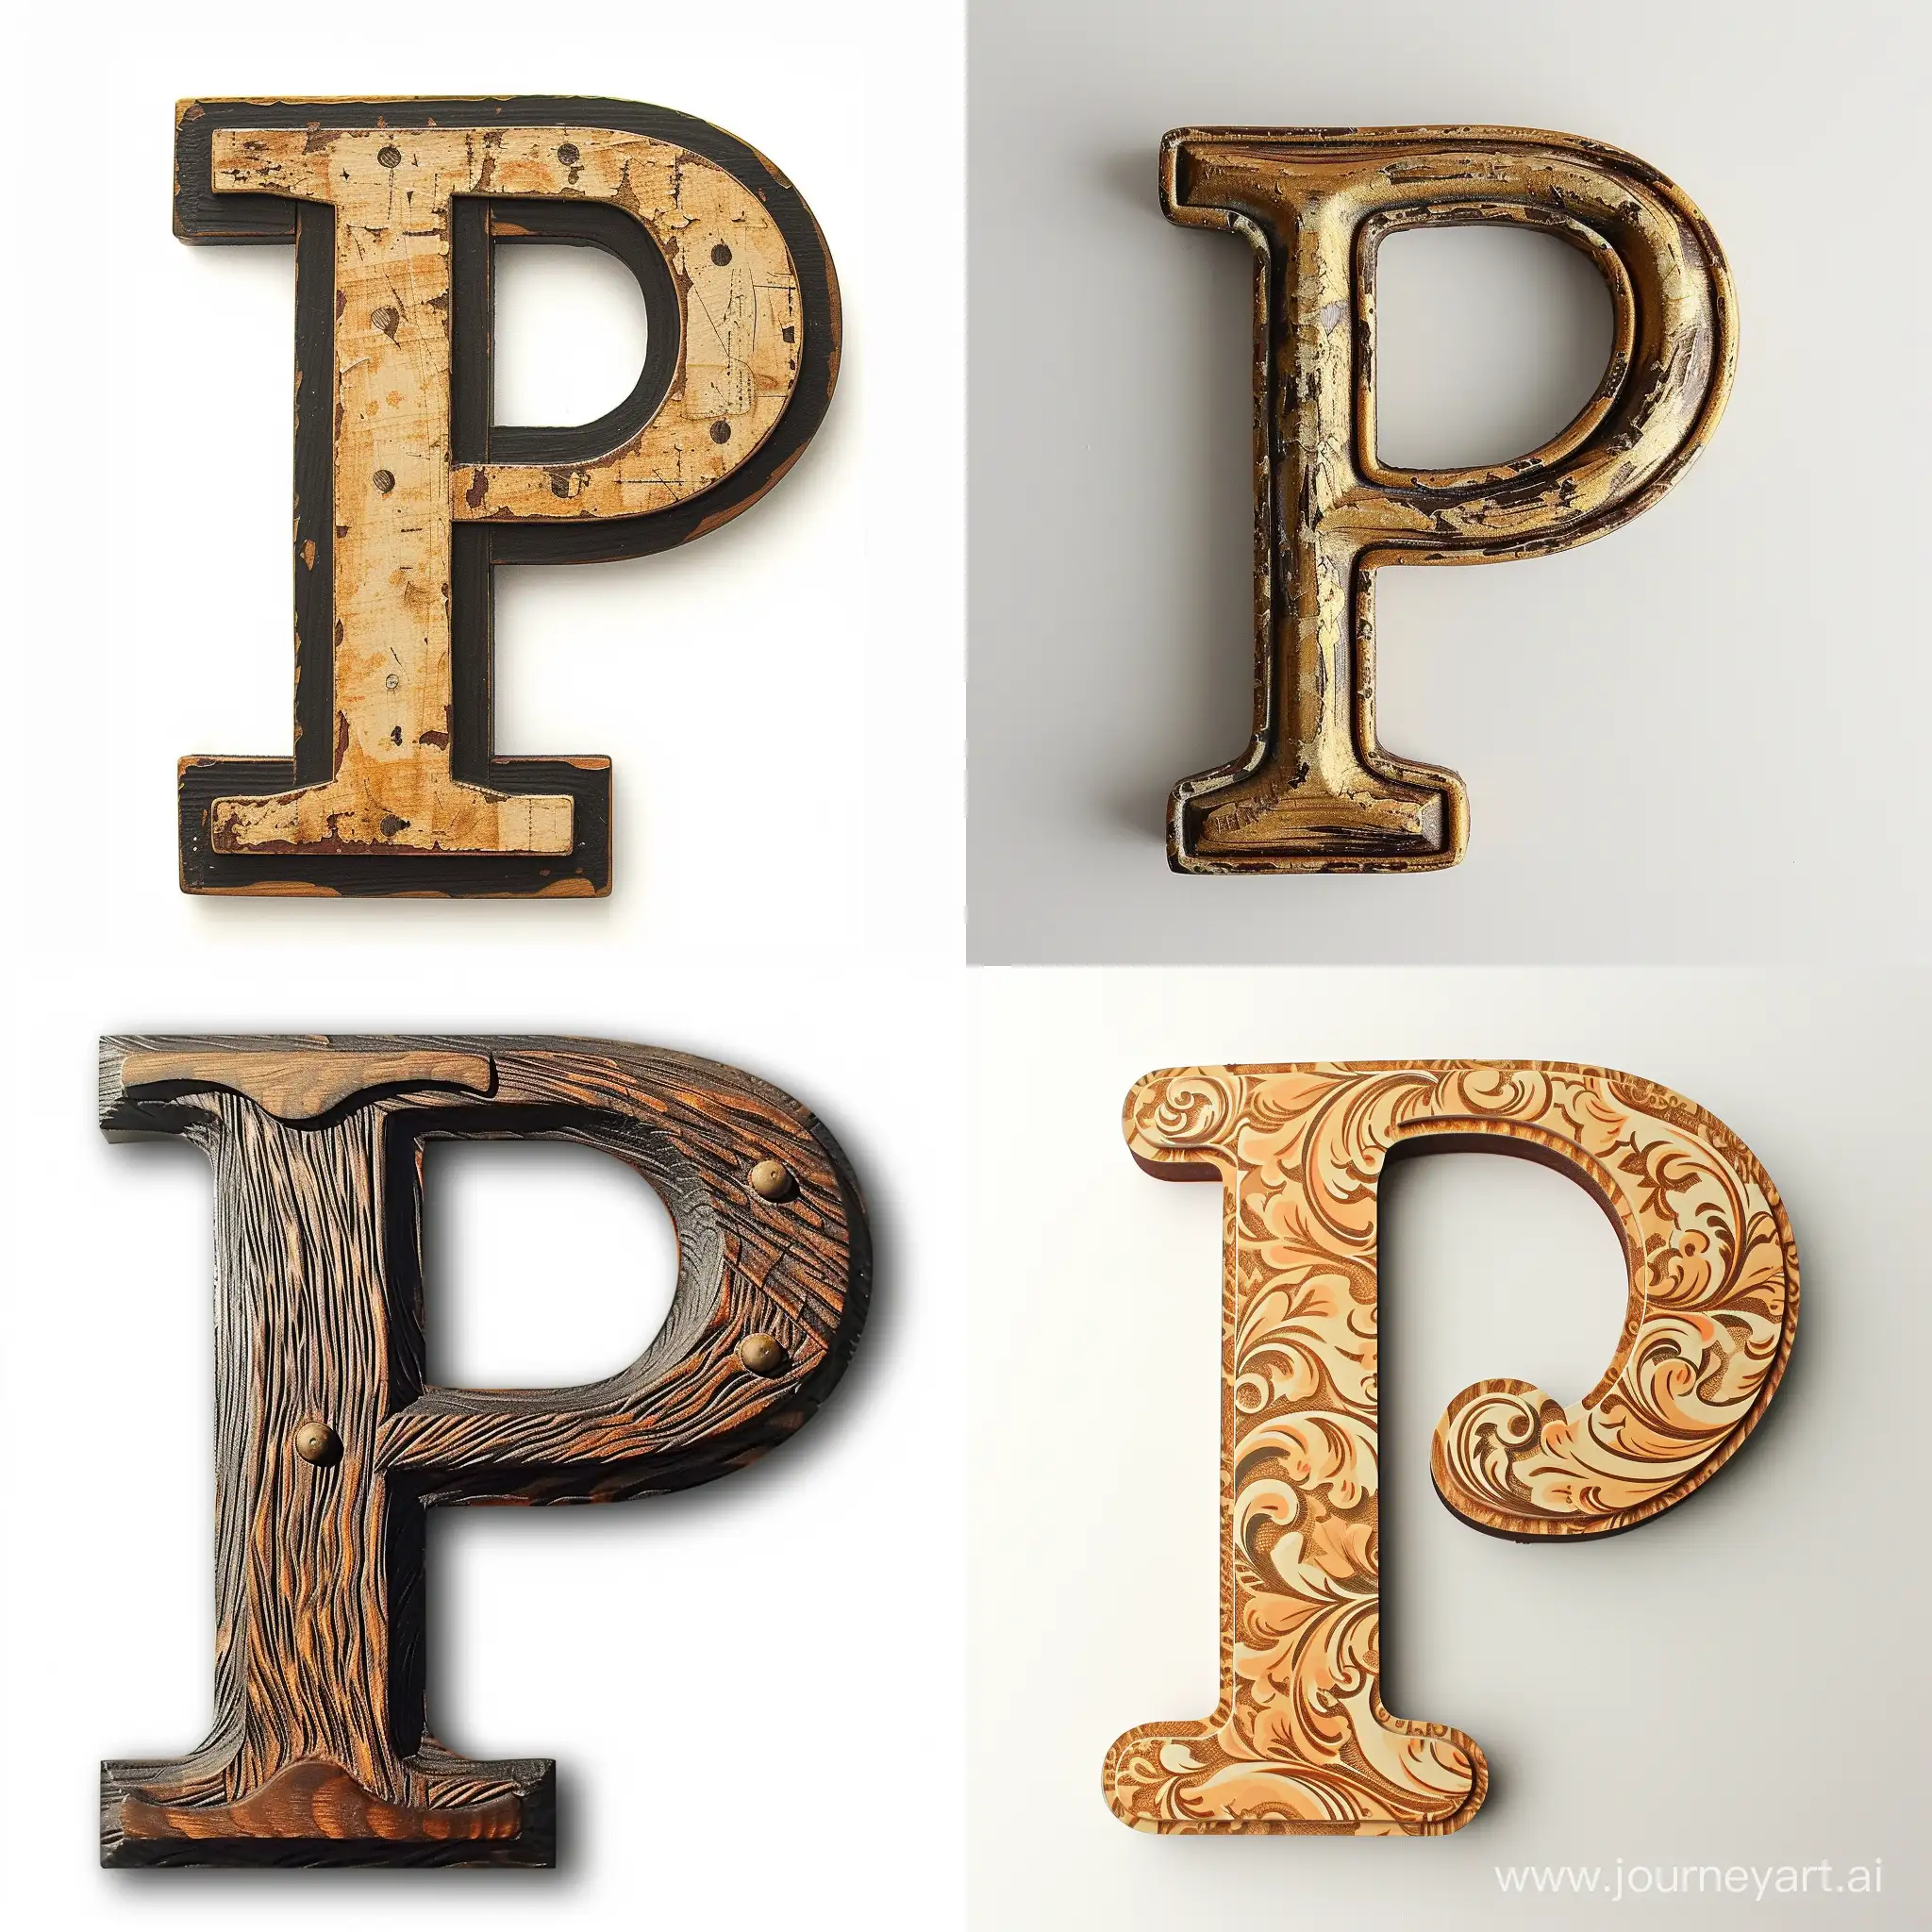 Vibrant-Letter-P-Art-with-3D-Effects-and-Geometric-Patterns